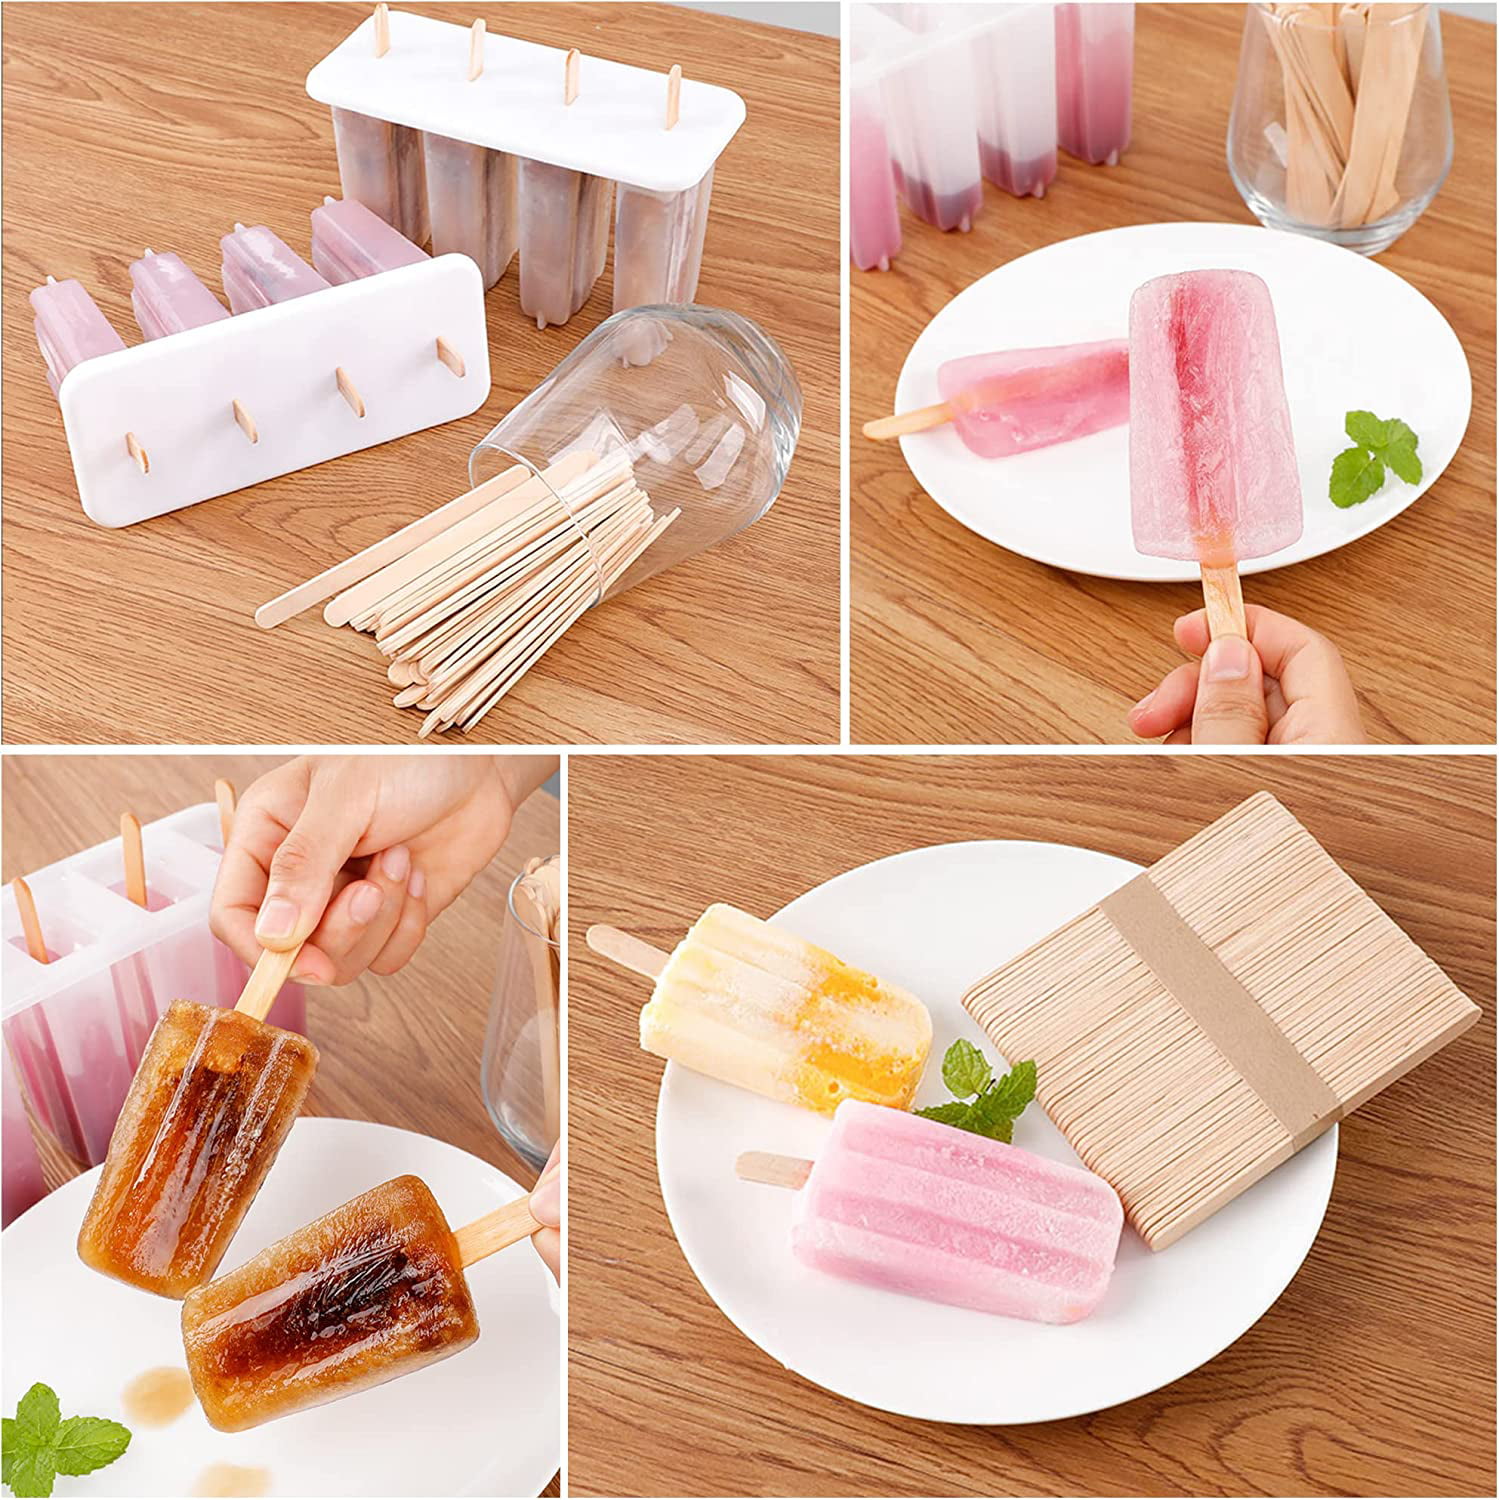 Heiheiup Tongue Craft Sticks Wax [50/100/150 Sticks Popsicle Multi-Purpose Wooden  Wood Ice /200/300Count] Waxing ICES Home DIY Small round Cake Pan Removable  Bottom 